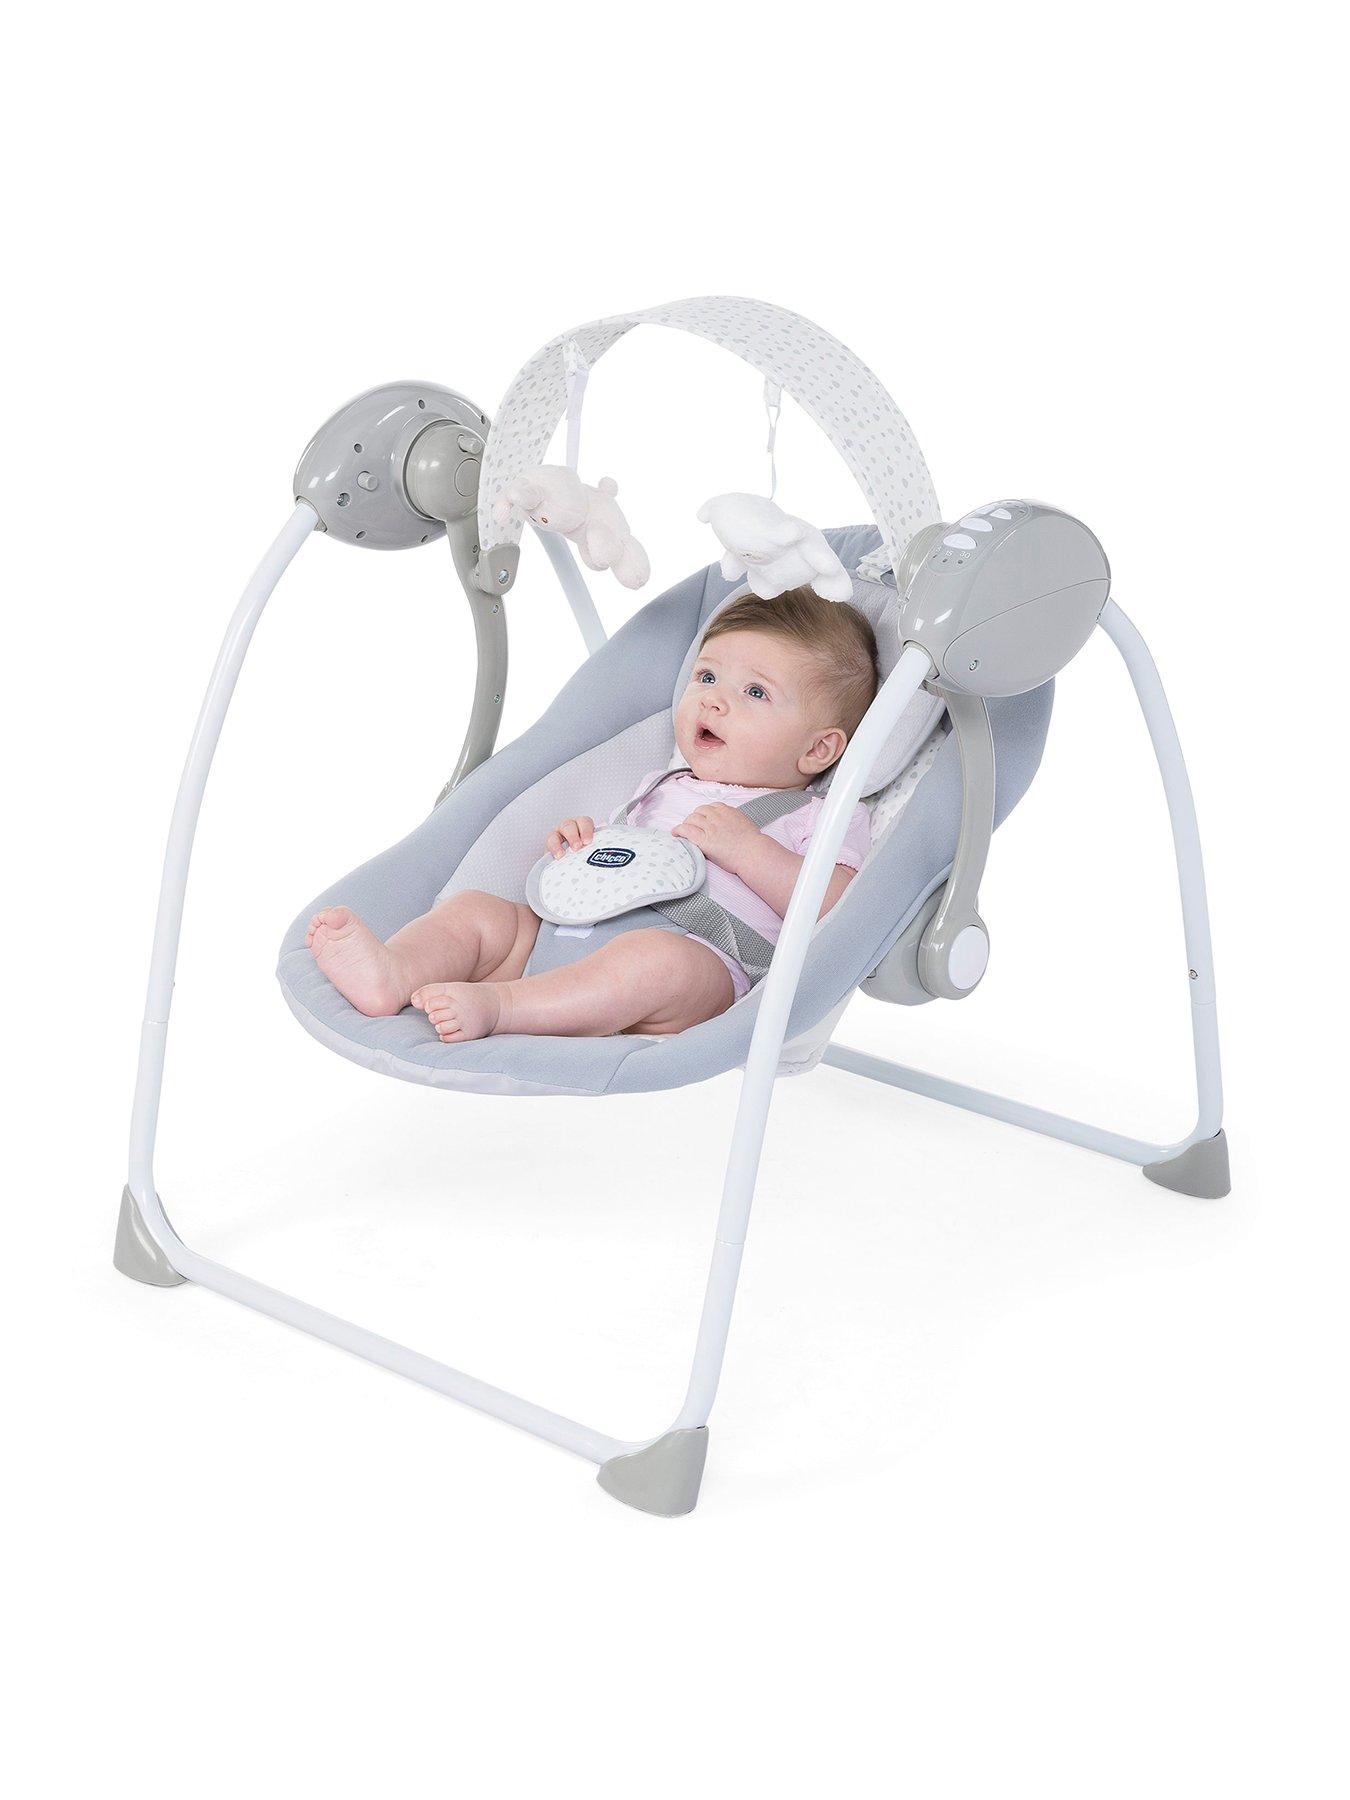 baby bouncer playstation